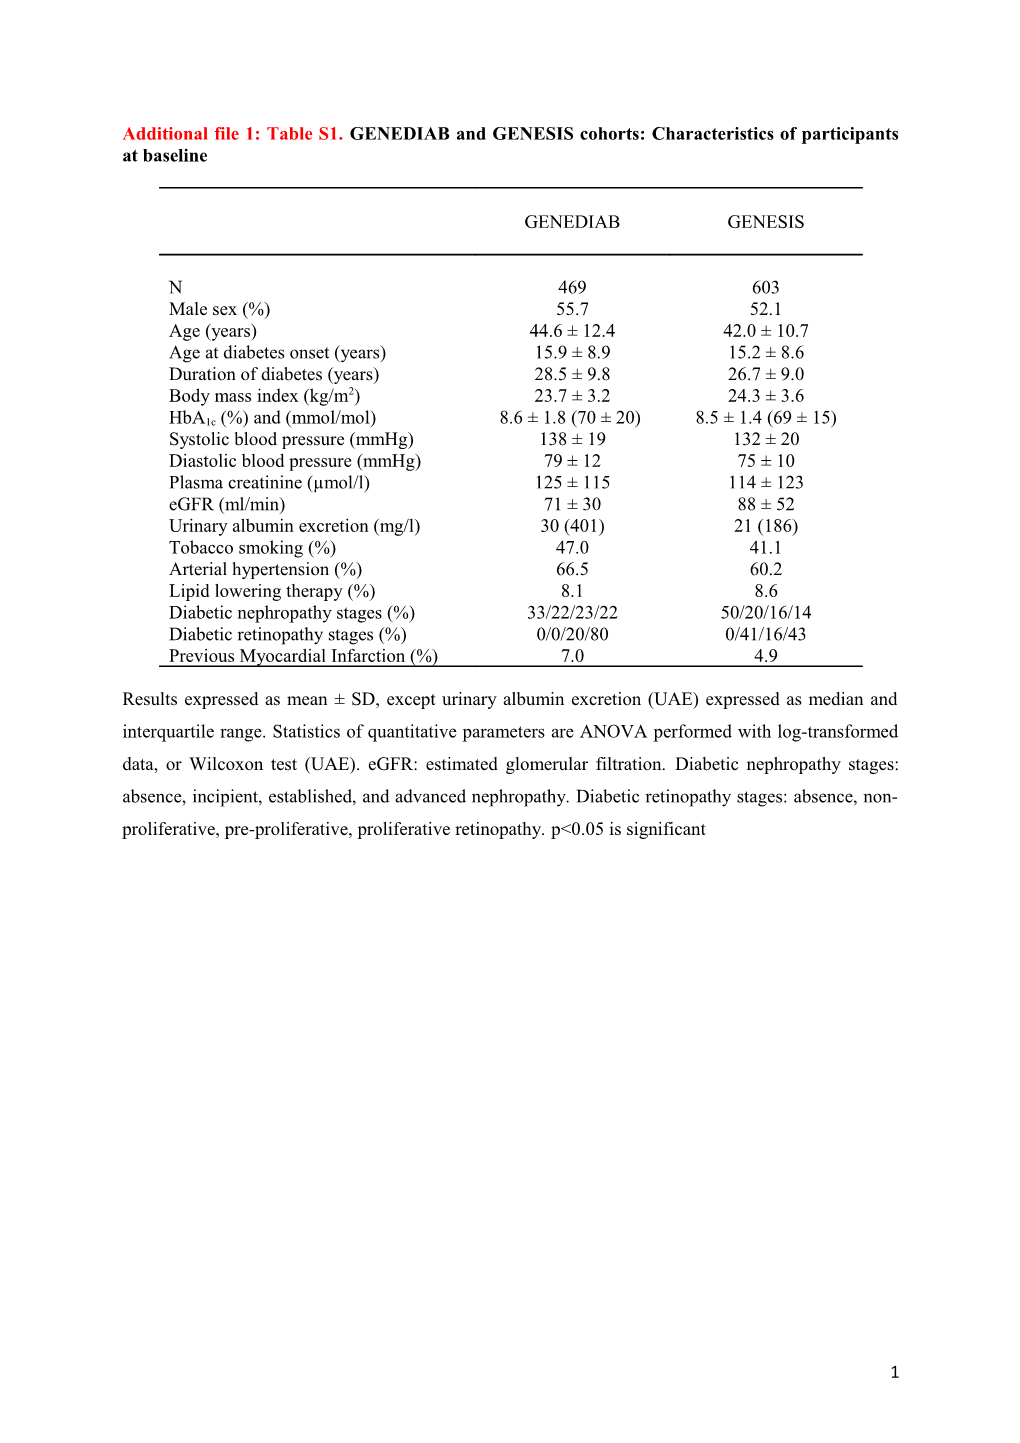 Allelic Variations in Catalase and Risk of Microvascular Complications in Subjects With